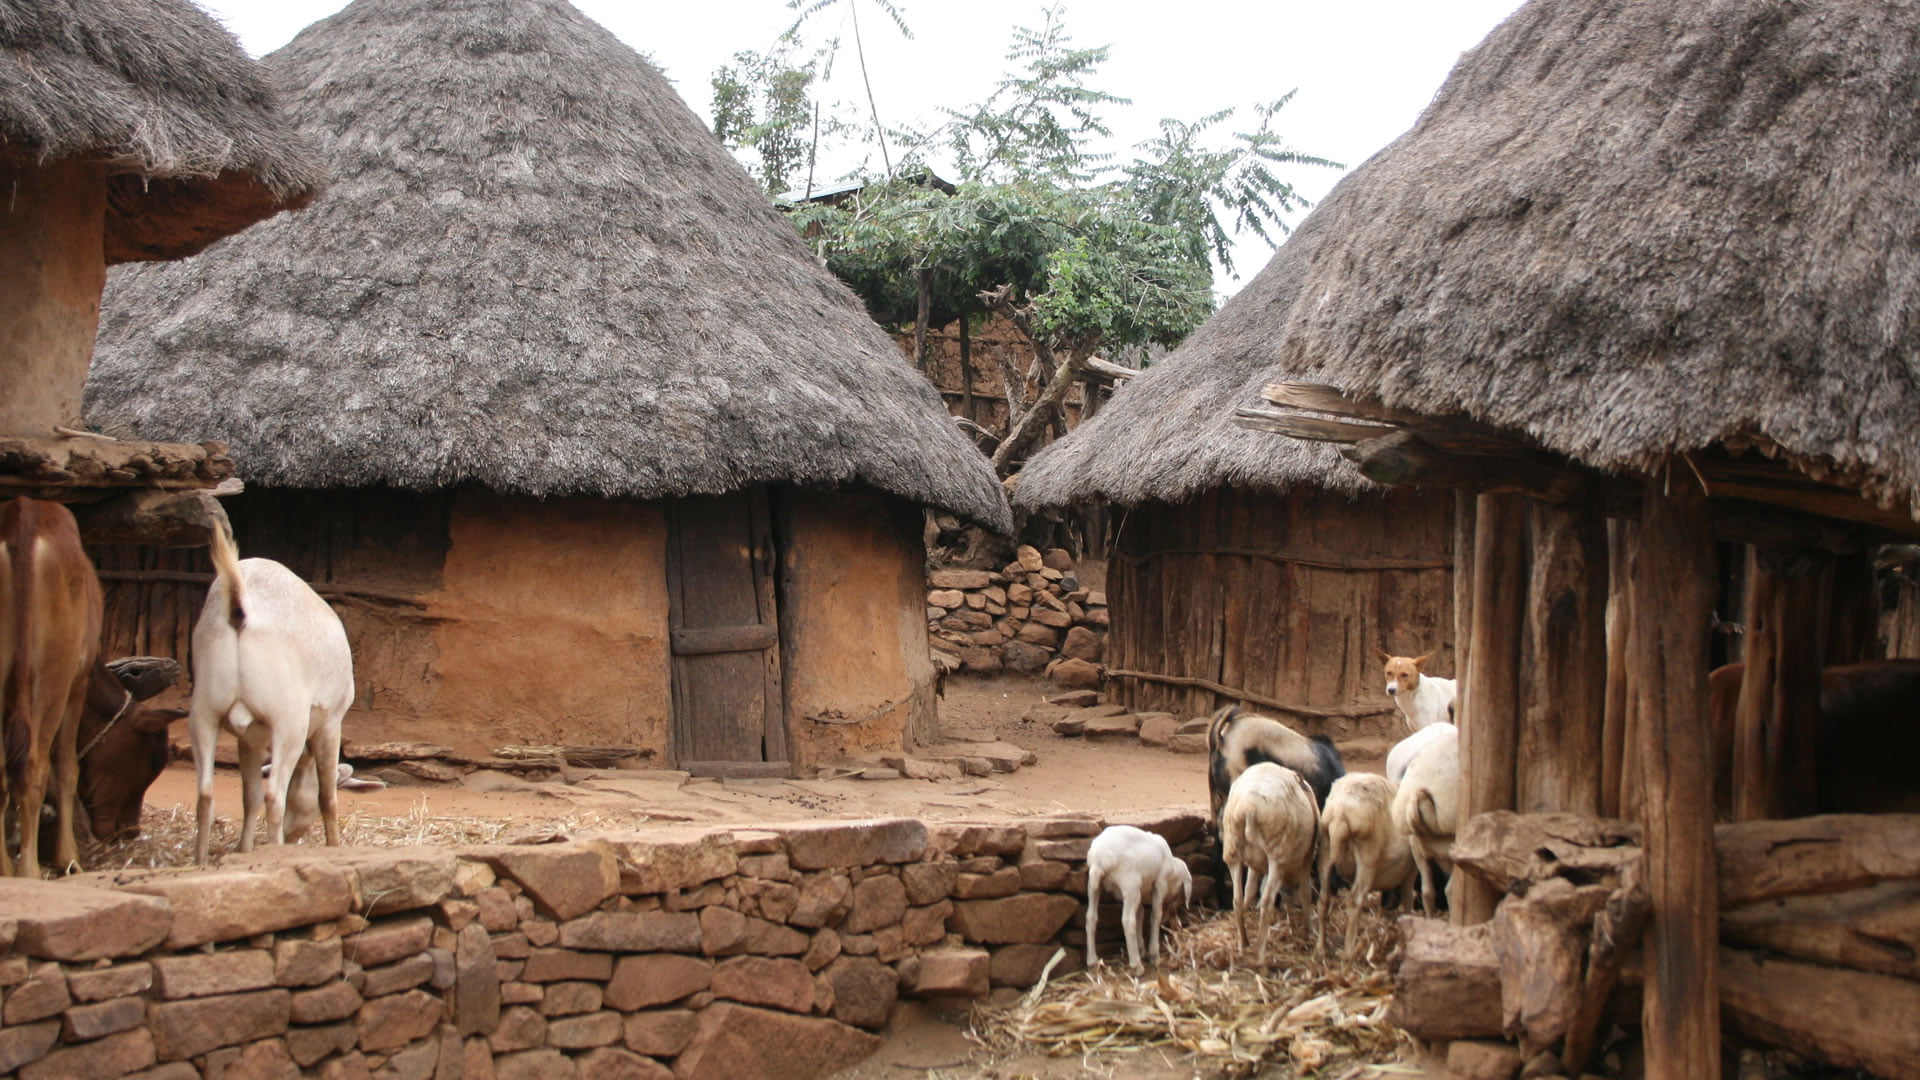 Typical houses of the Konso Community (Ethiopia)